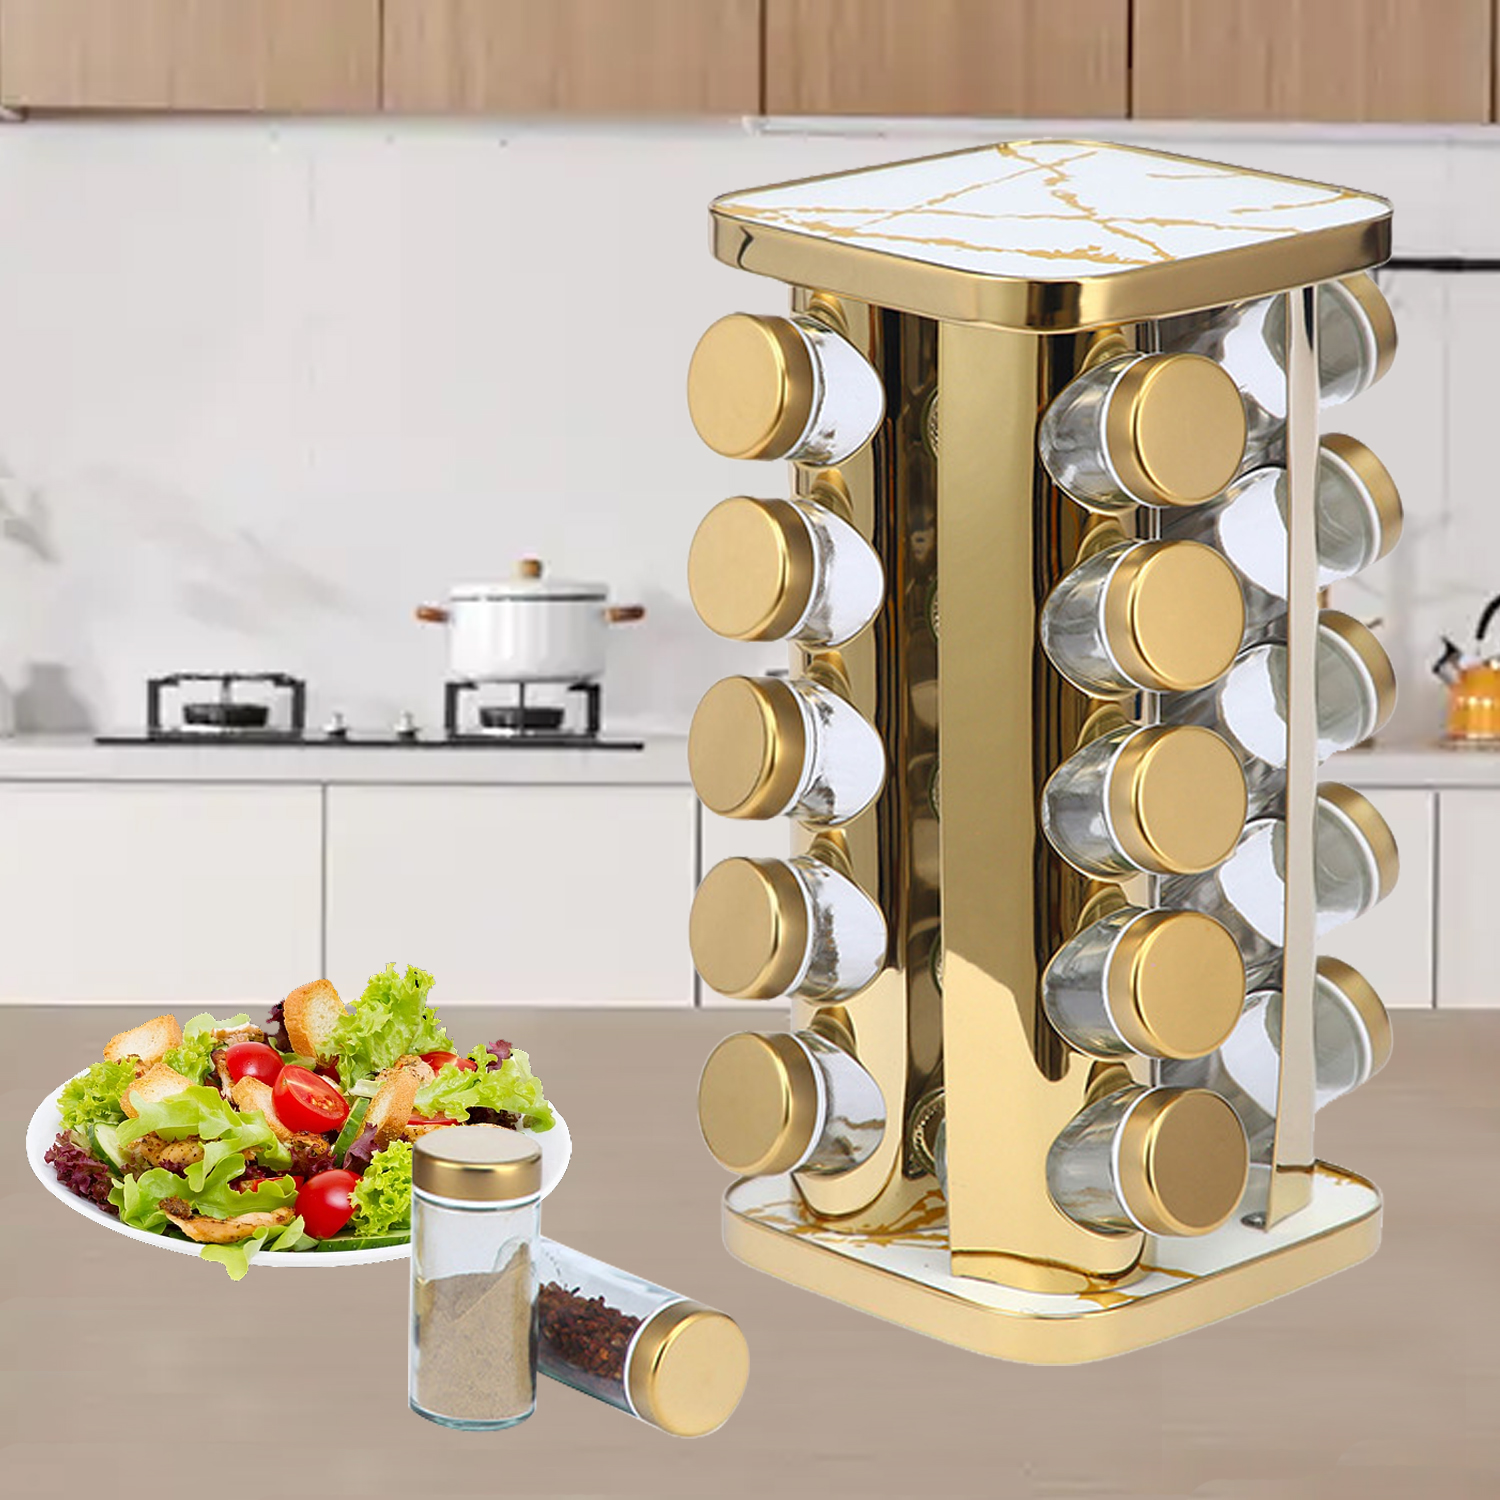 360 Degrees Rotating Spice Rack with 12 Pcs 16 Pcs 20 Pcs Seasoning Jars,Rounded Square Revolving Tower Organizer Marble-Grain Stainless Steel for Kitchen Storage Rack